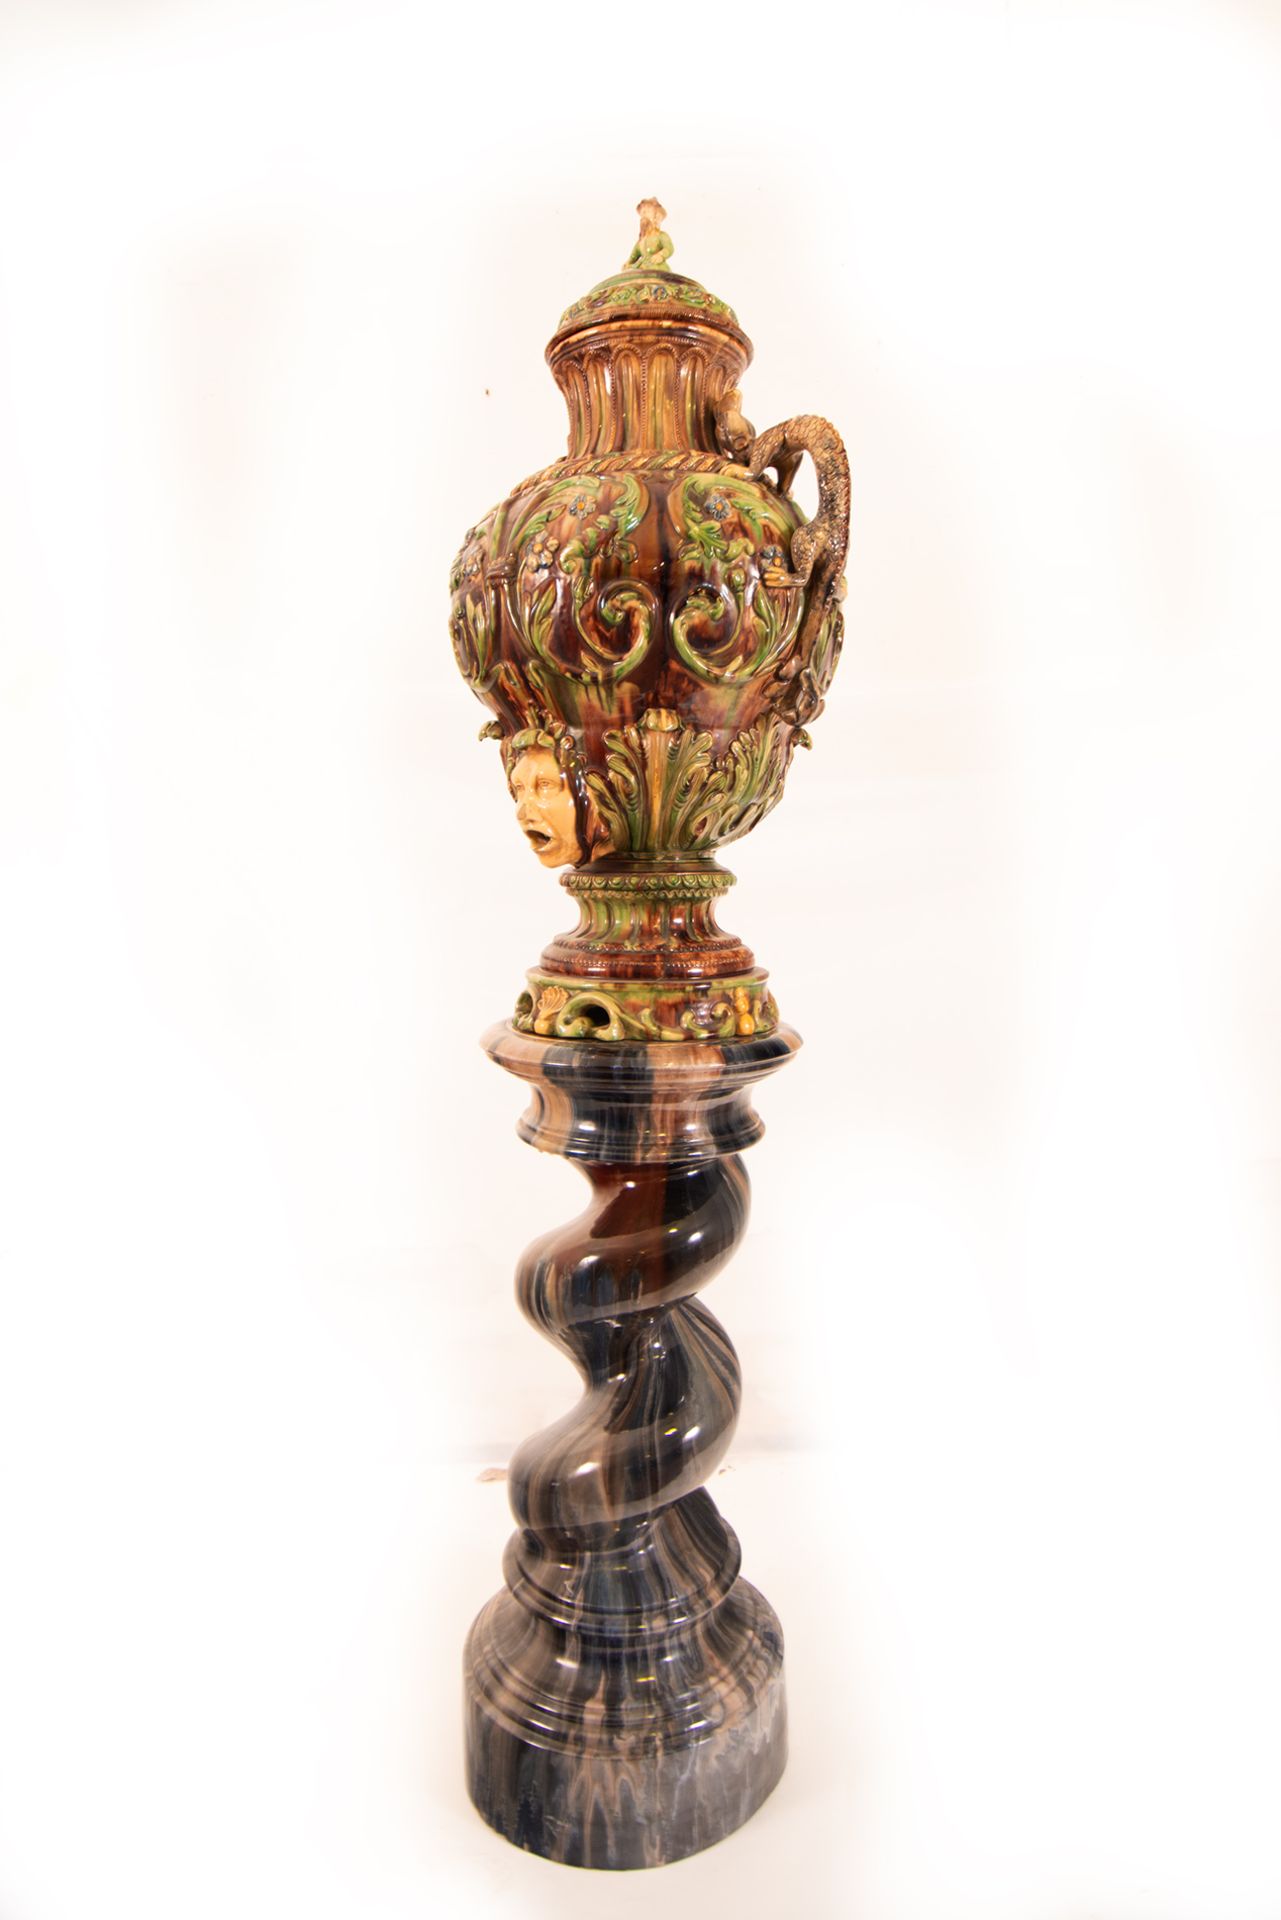 Ewer in enameled stoneware in the Art Nouveau style, French or Italian school of the 19th - 20th cen - Image 2 of 11